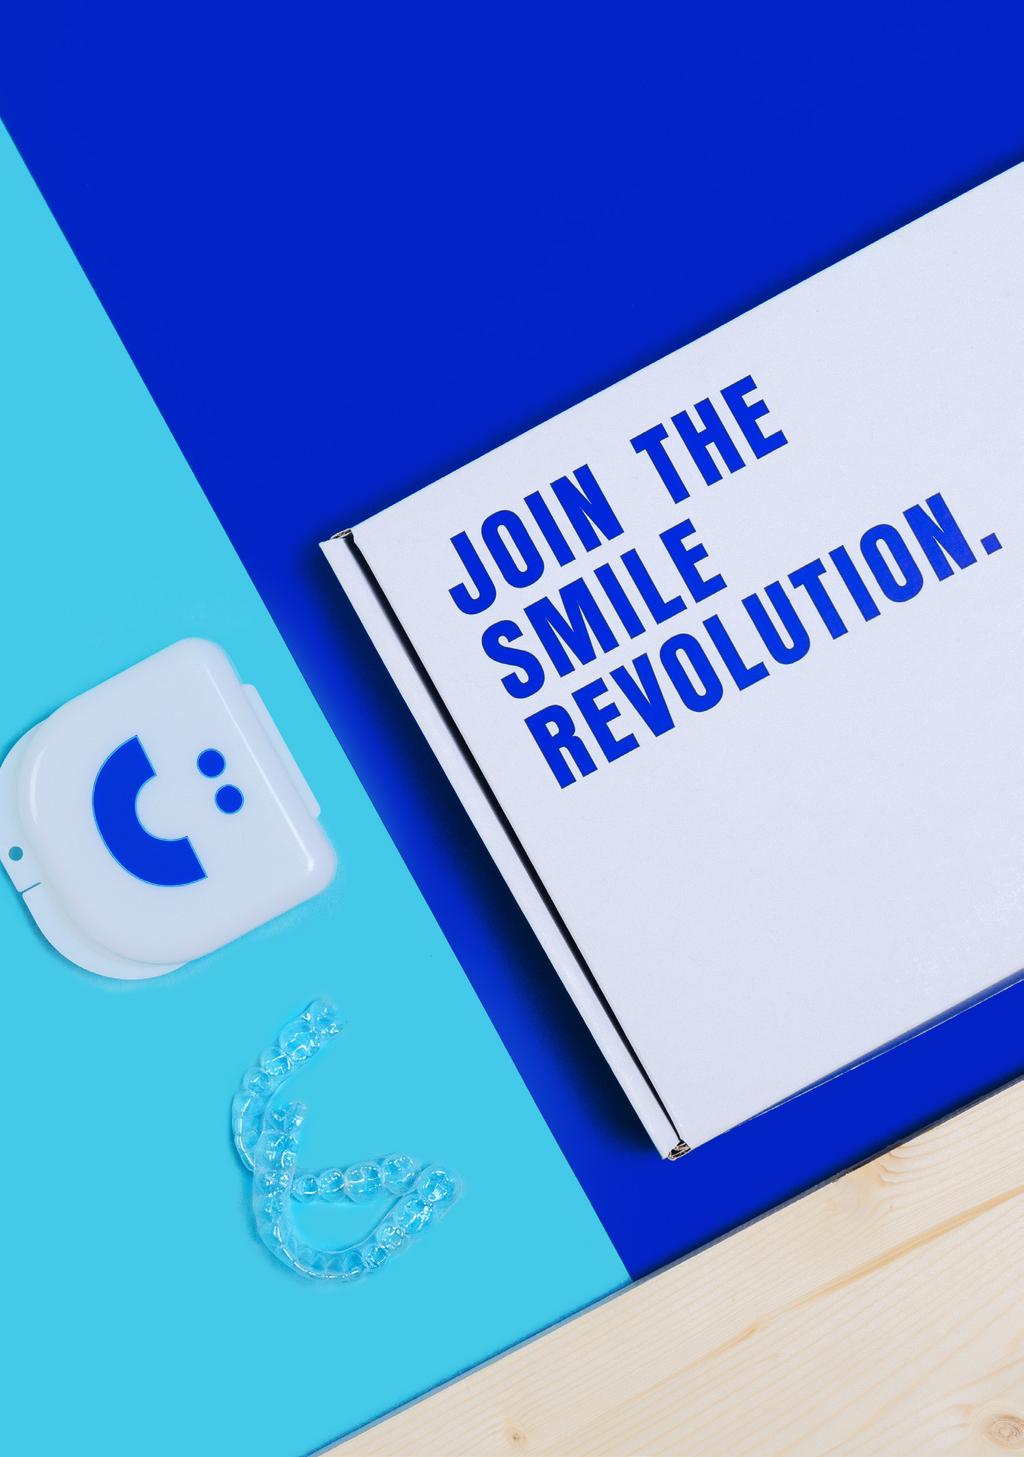 1 GET YOUR SMILE EVALUATION. Getting started is easy. Simply order one of our Home Smile Kits to make impressions at home.